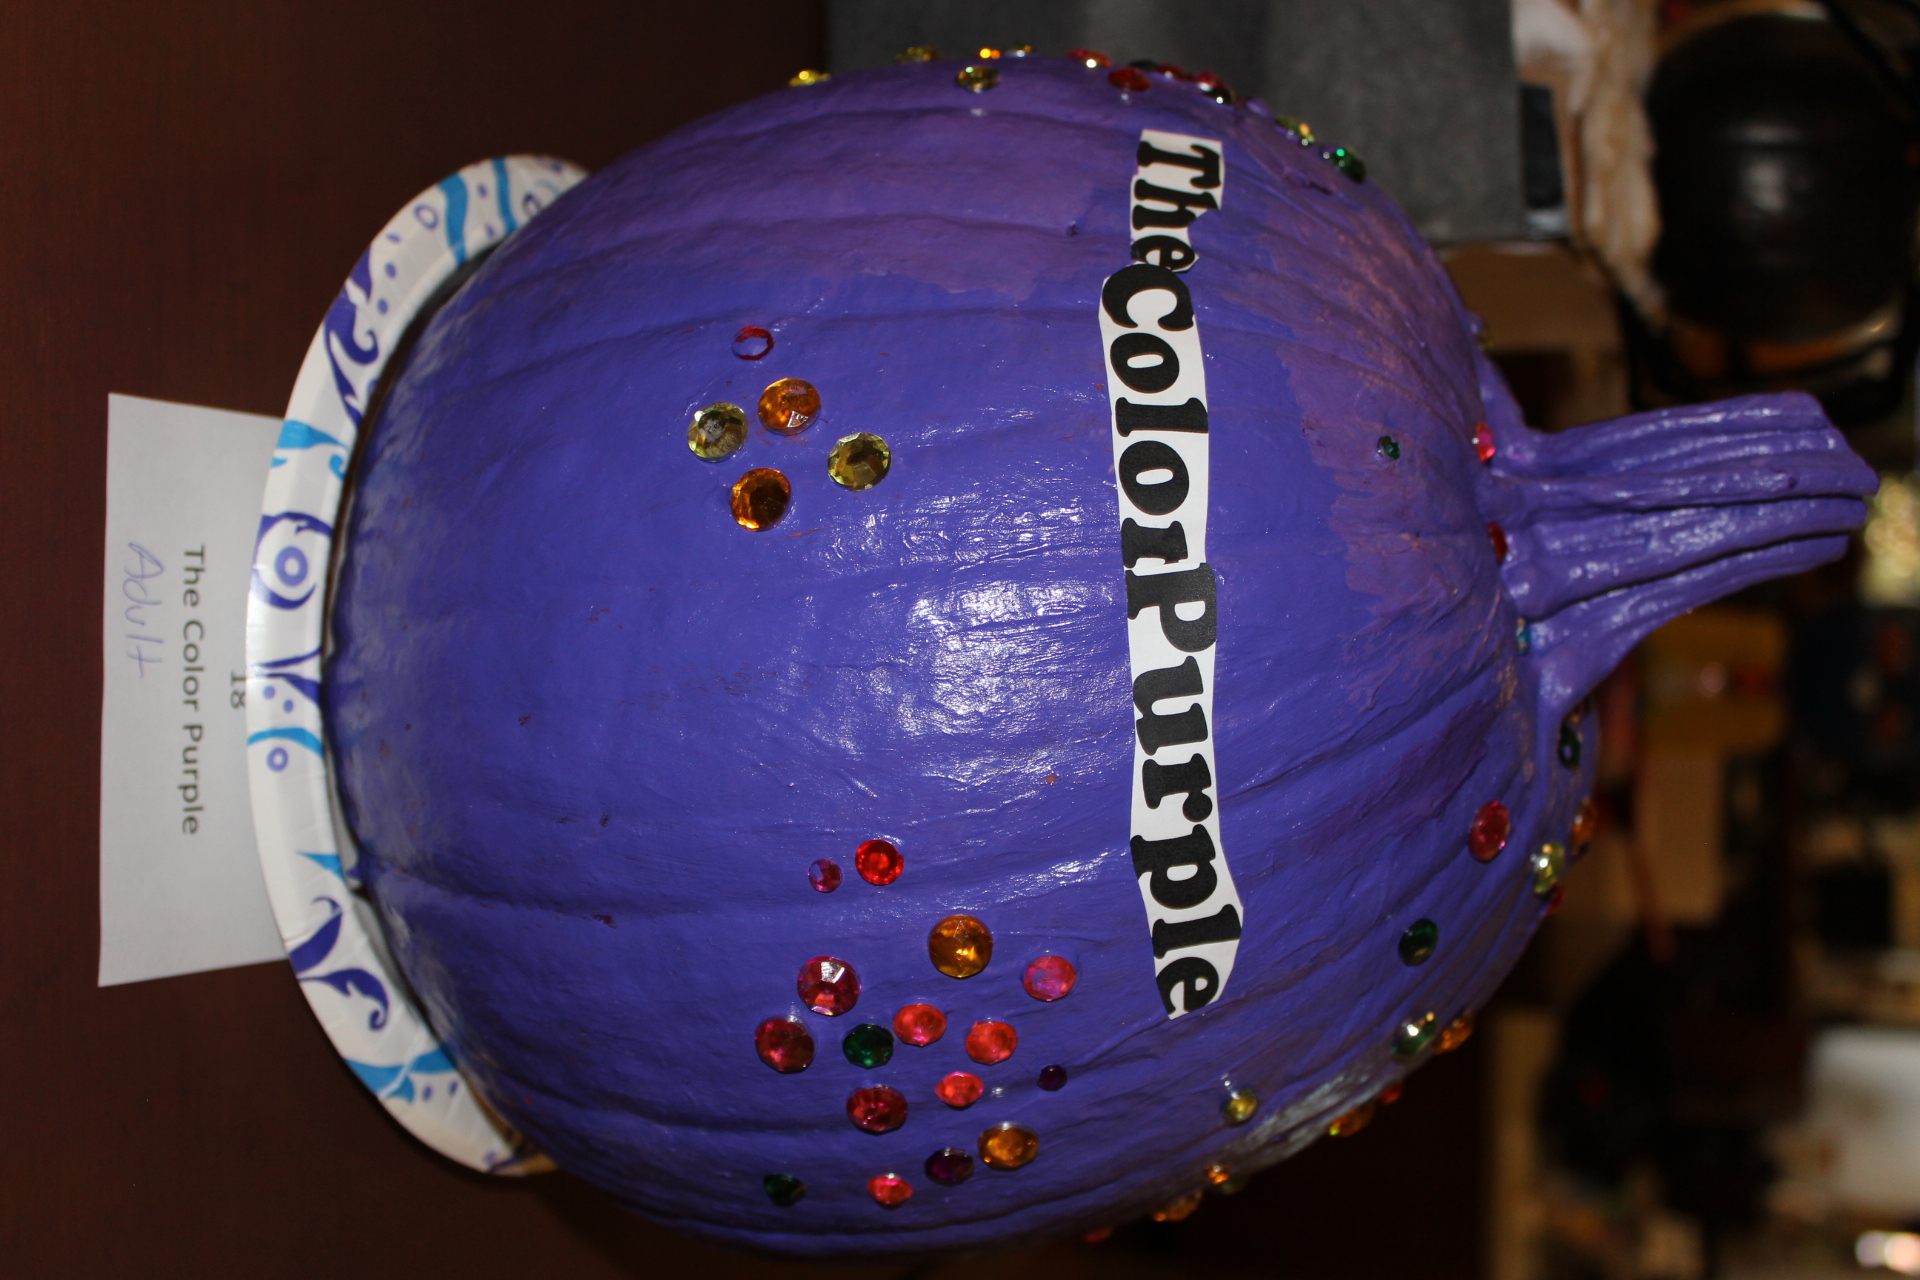 Pumpkin decorated as "The Color Purple"